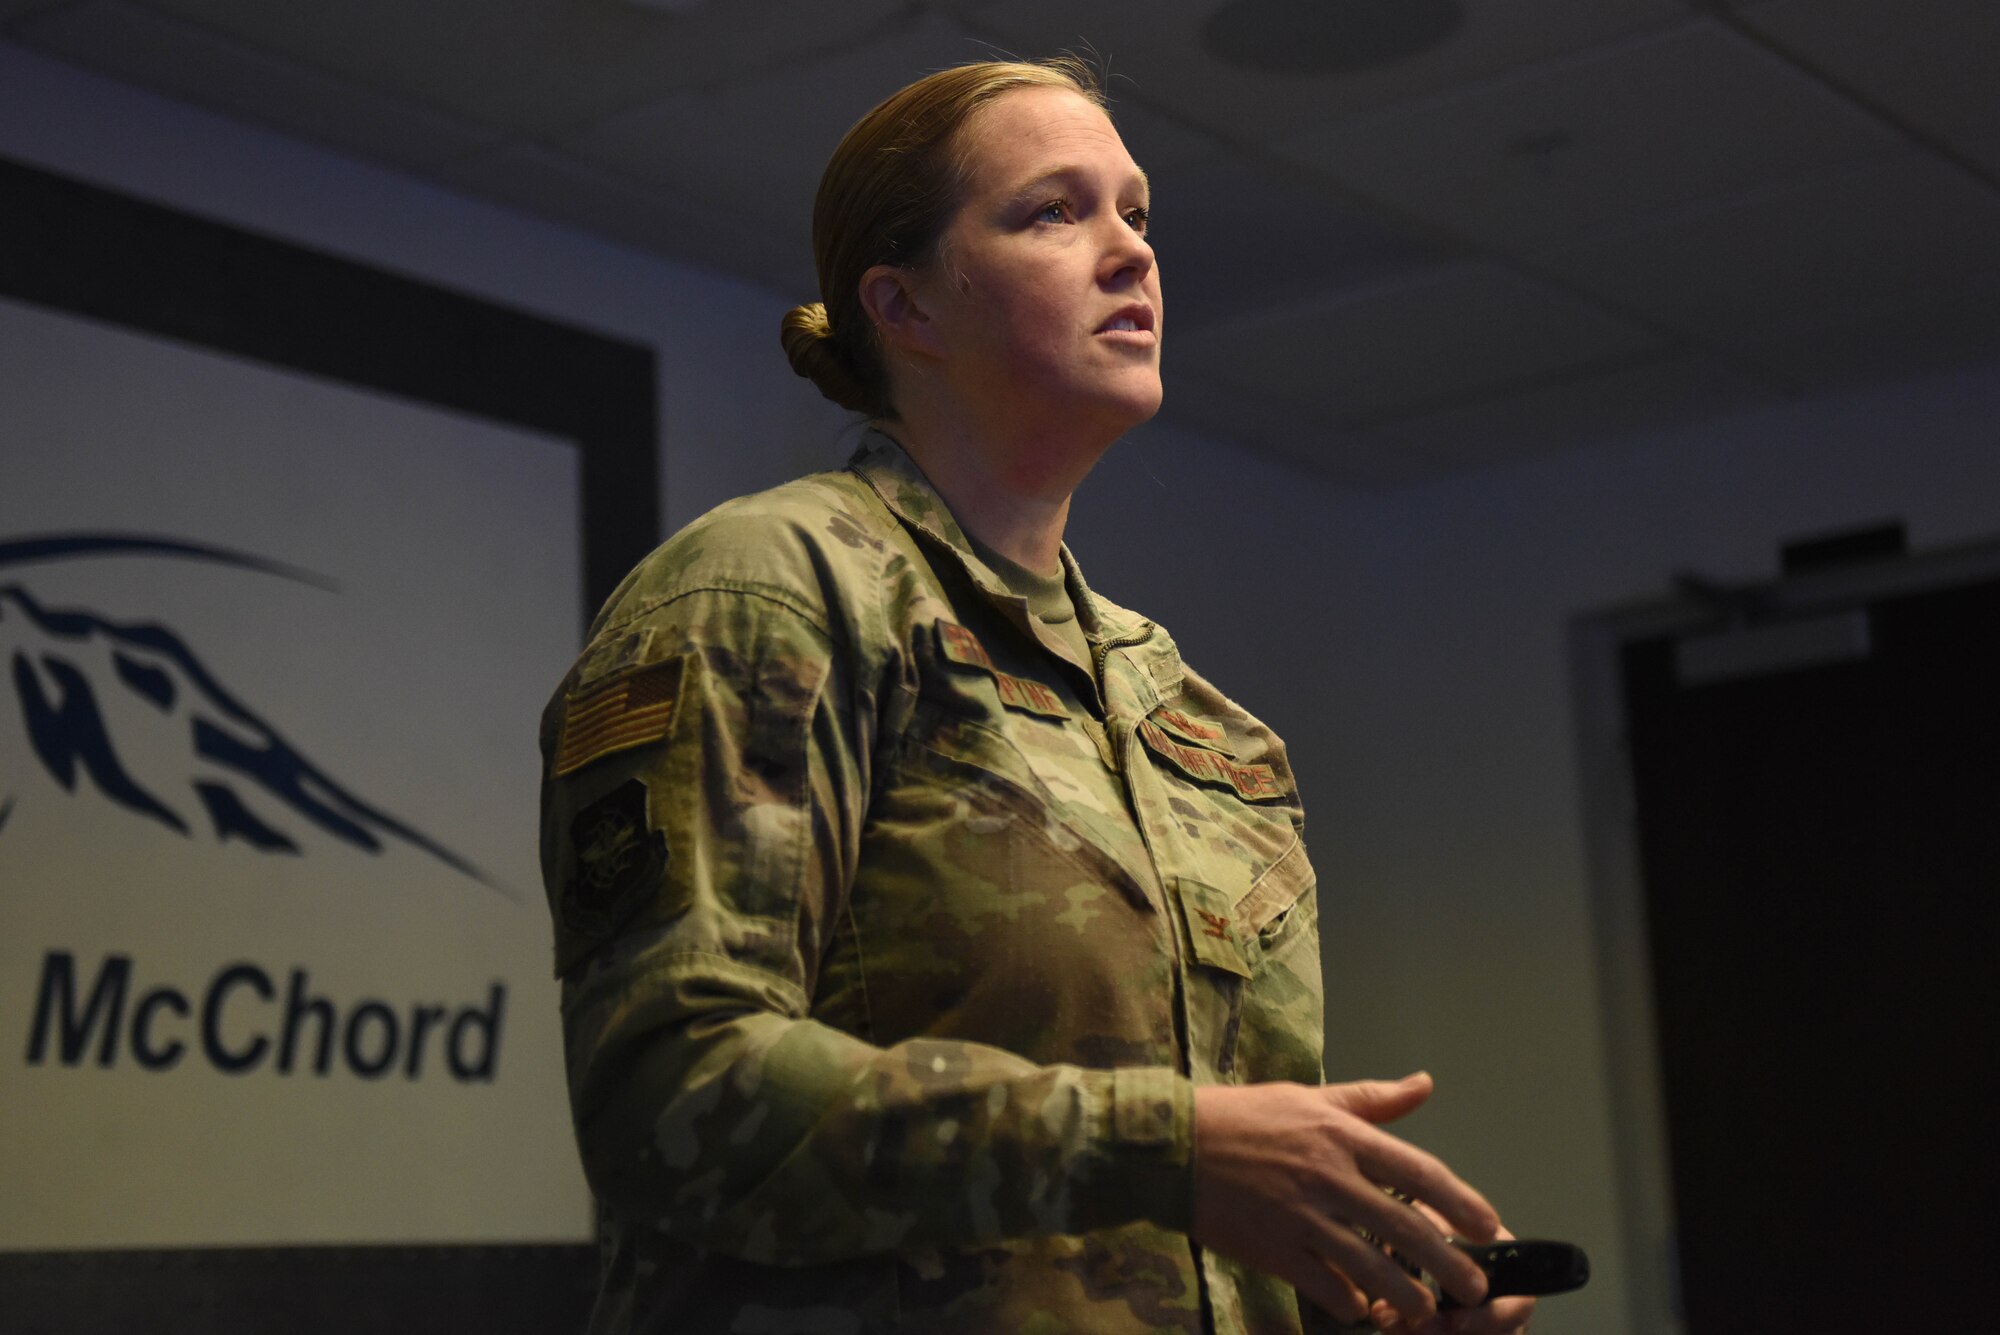 U.S. Air Force Col. Erin Staine-Pyne, 62nd Airlift Wing commander, delivers remarks during Wingman Day at Joint Base Lewis-McChord, Wash., Nov. 20, 2020. Wingman Day aims to build resilient Airmen through mental, physical, social and spiritual fitness. (U.S. Air Force photo by Airman 1st Class Callie Norton)